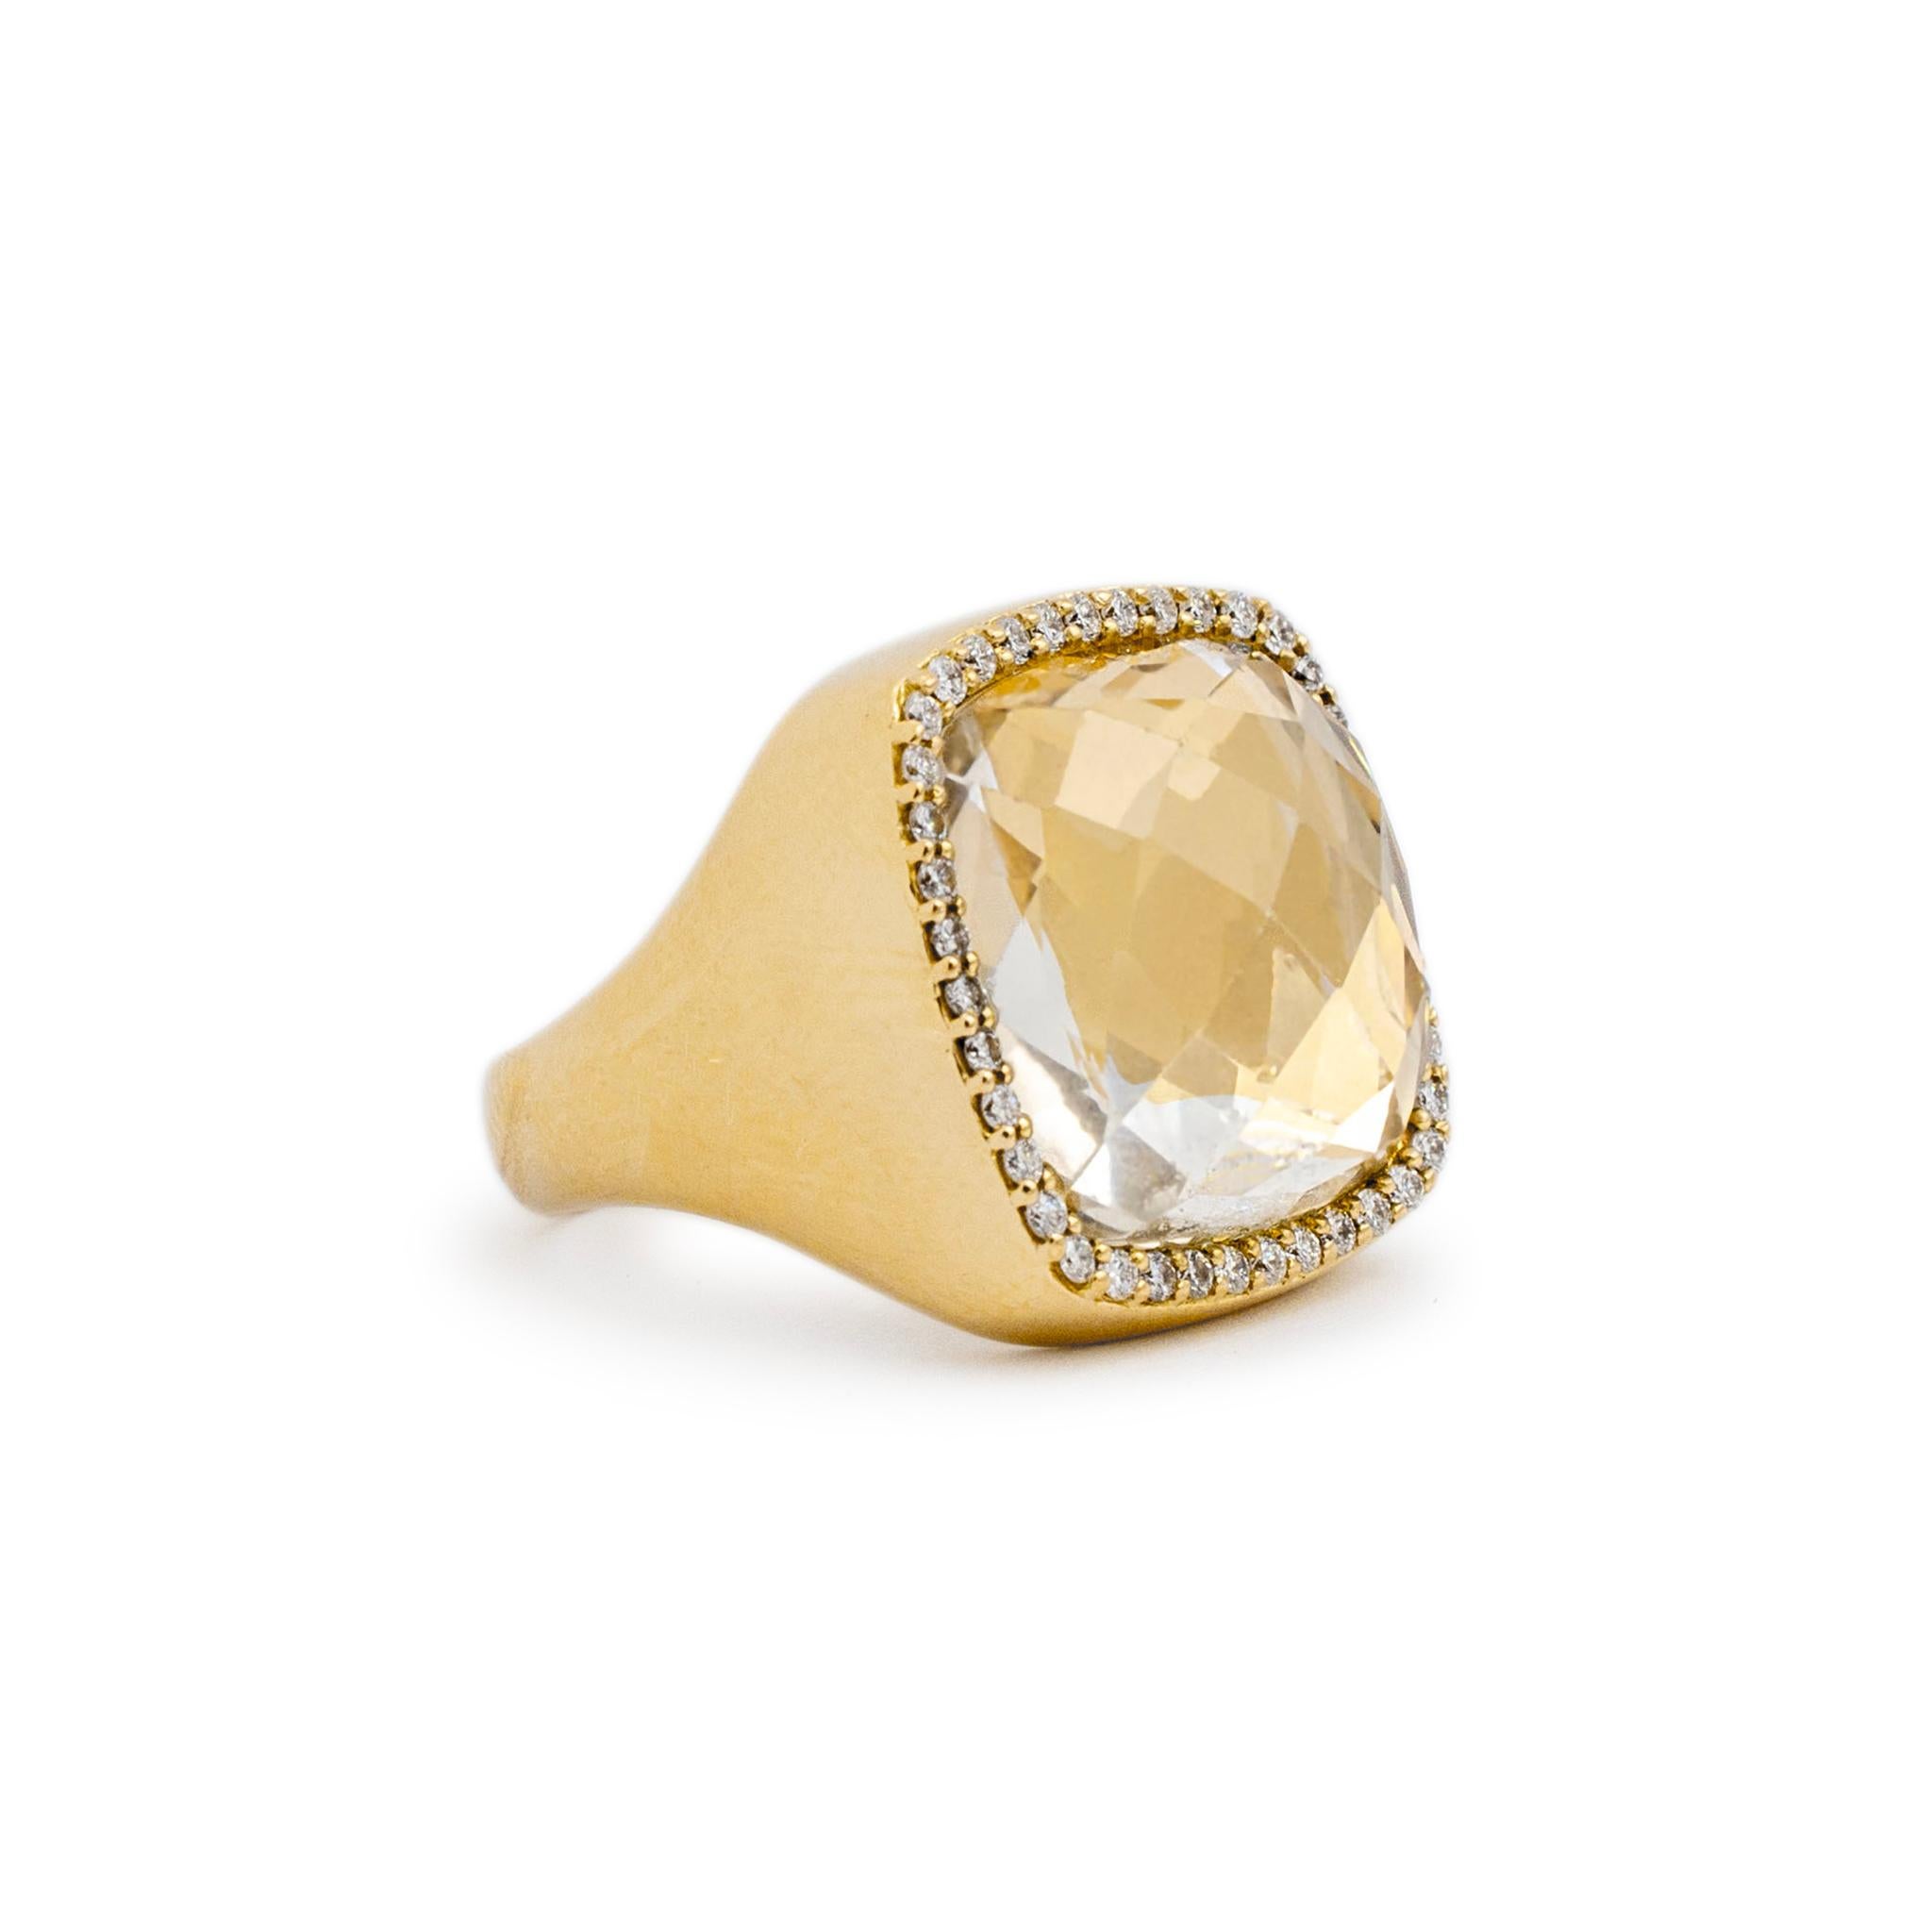 Roberto Coin 18K Yellow Gold Citrine Halo Diamond Cocktail Ring In Excellent Condition For Sale In Houston, TX